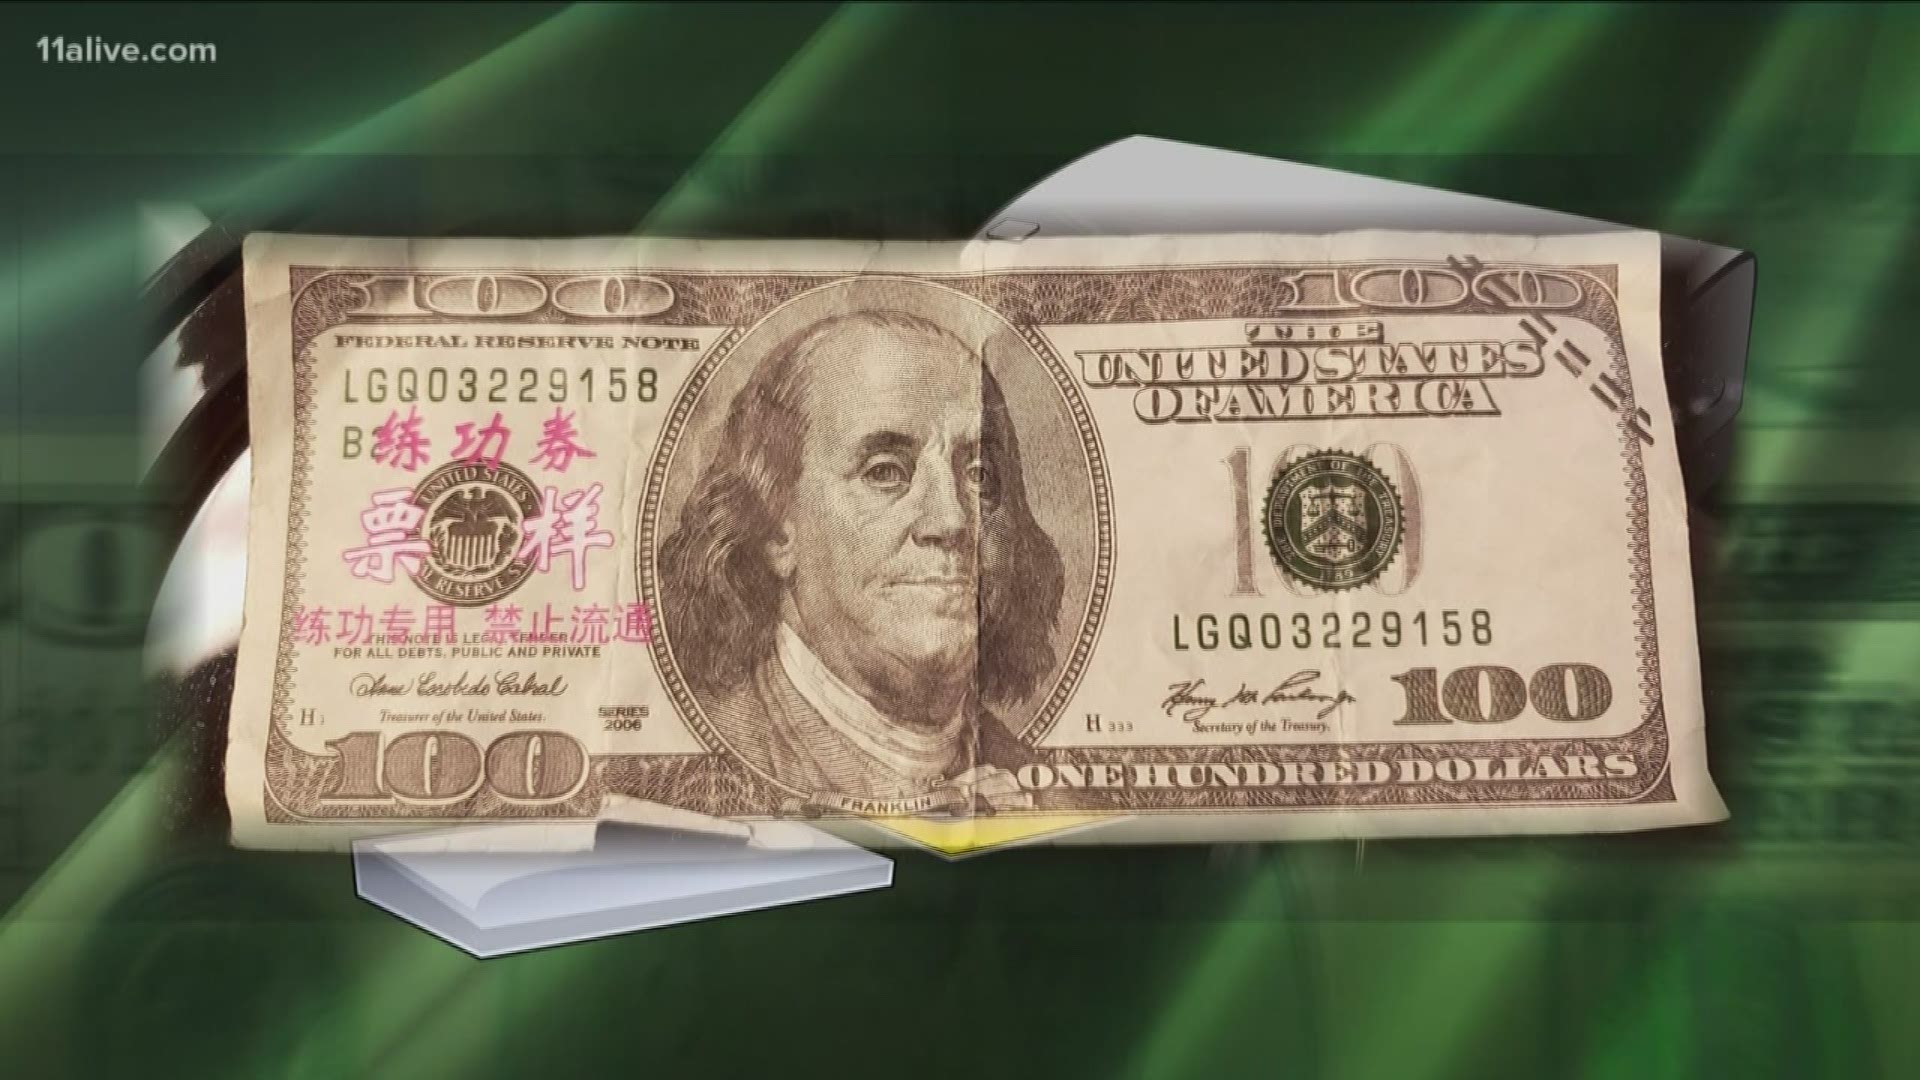 Authorities say the fake bills are apparently circulating in Georgia. If you pass one off as real, you could be in serious trouble.